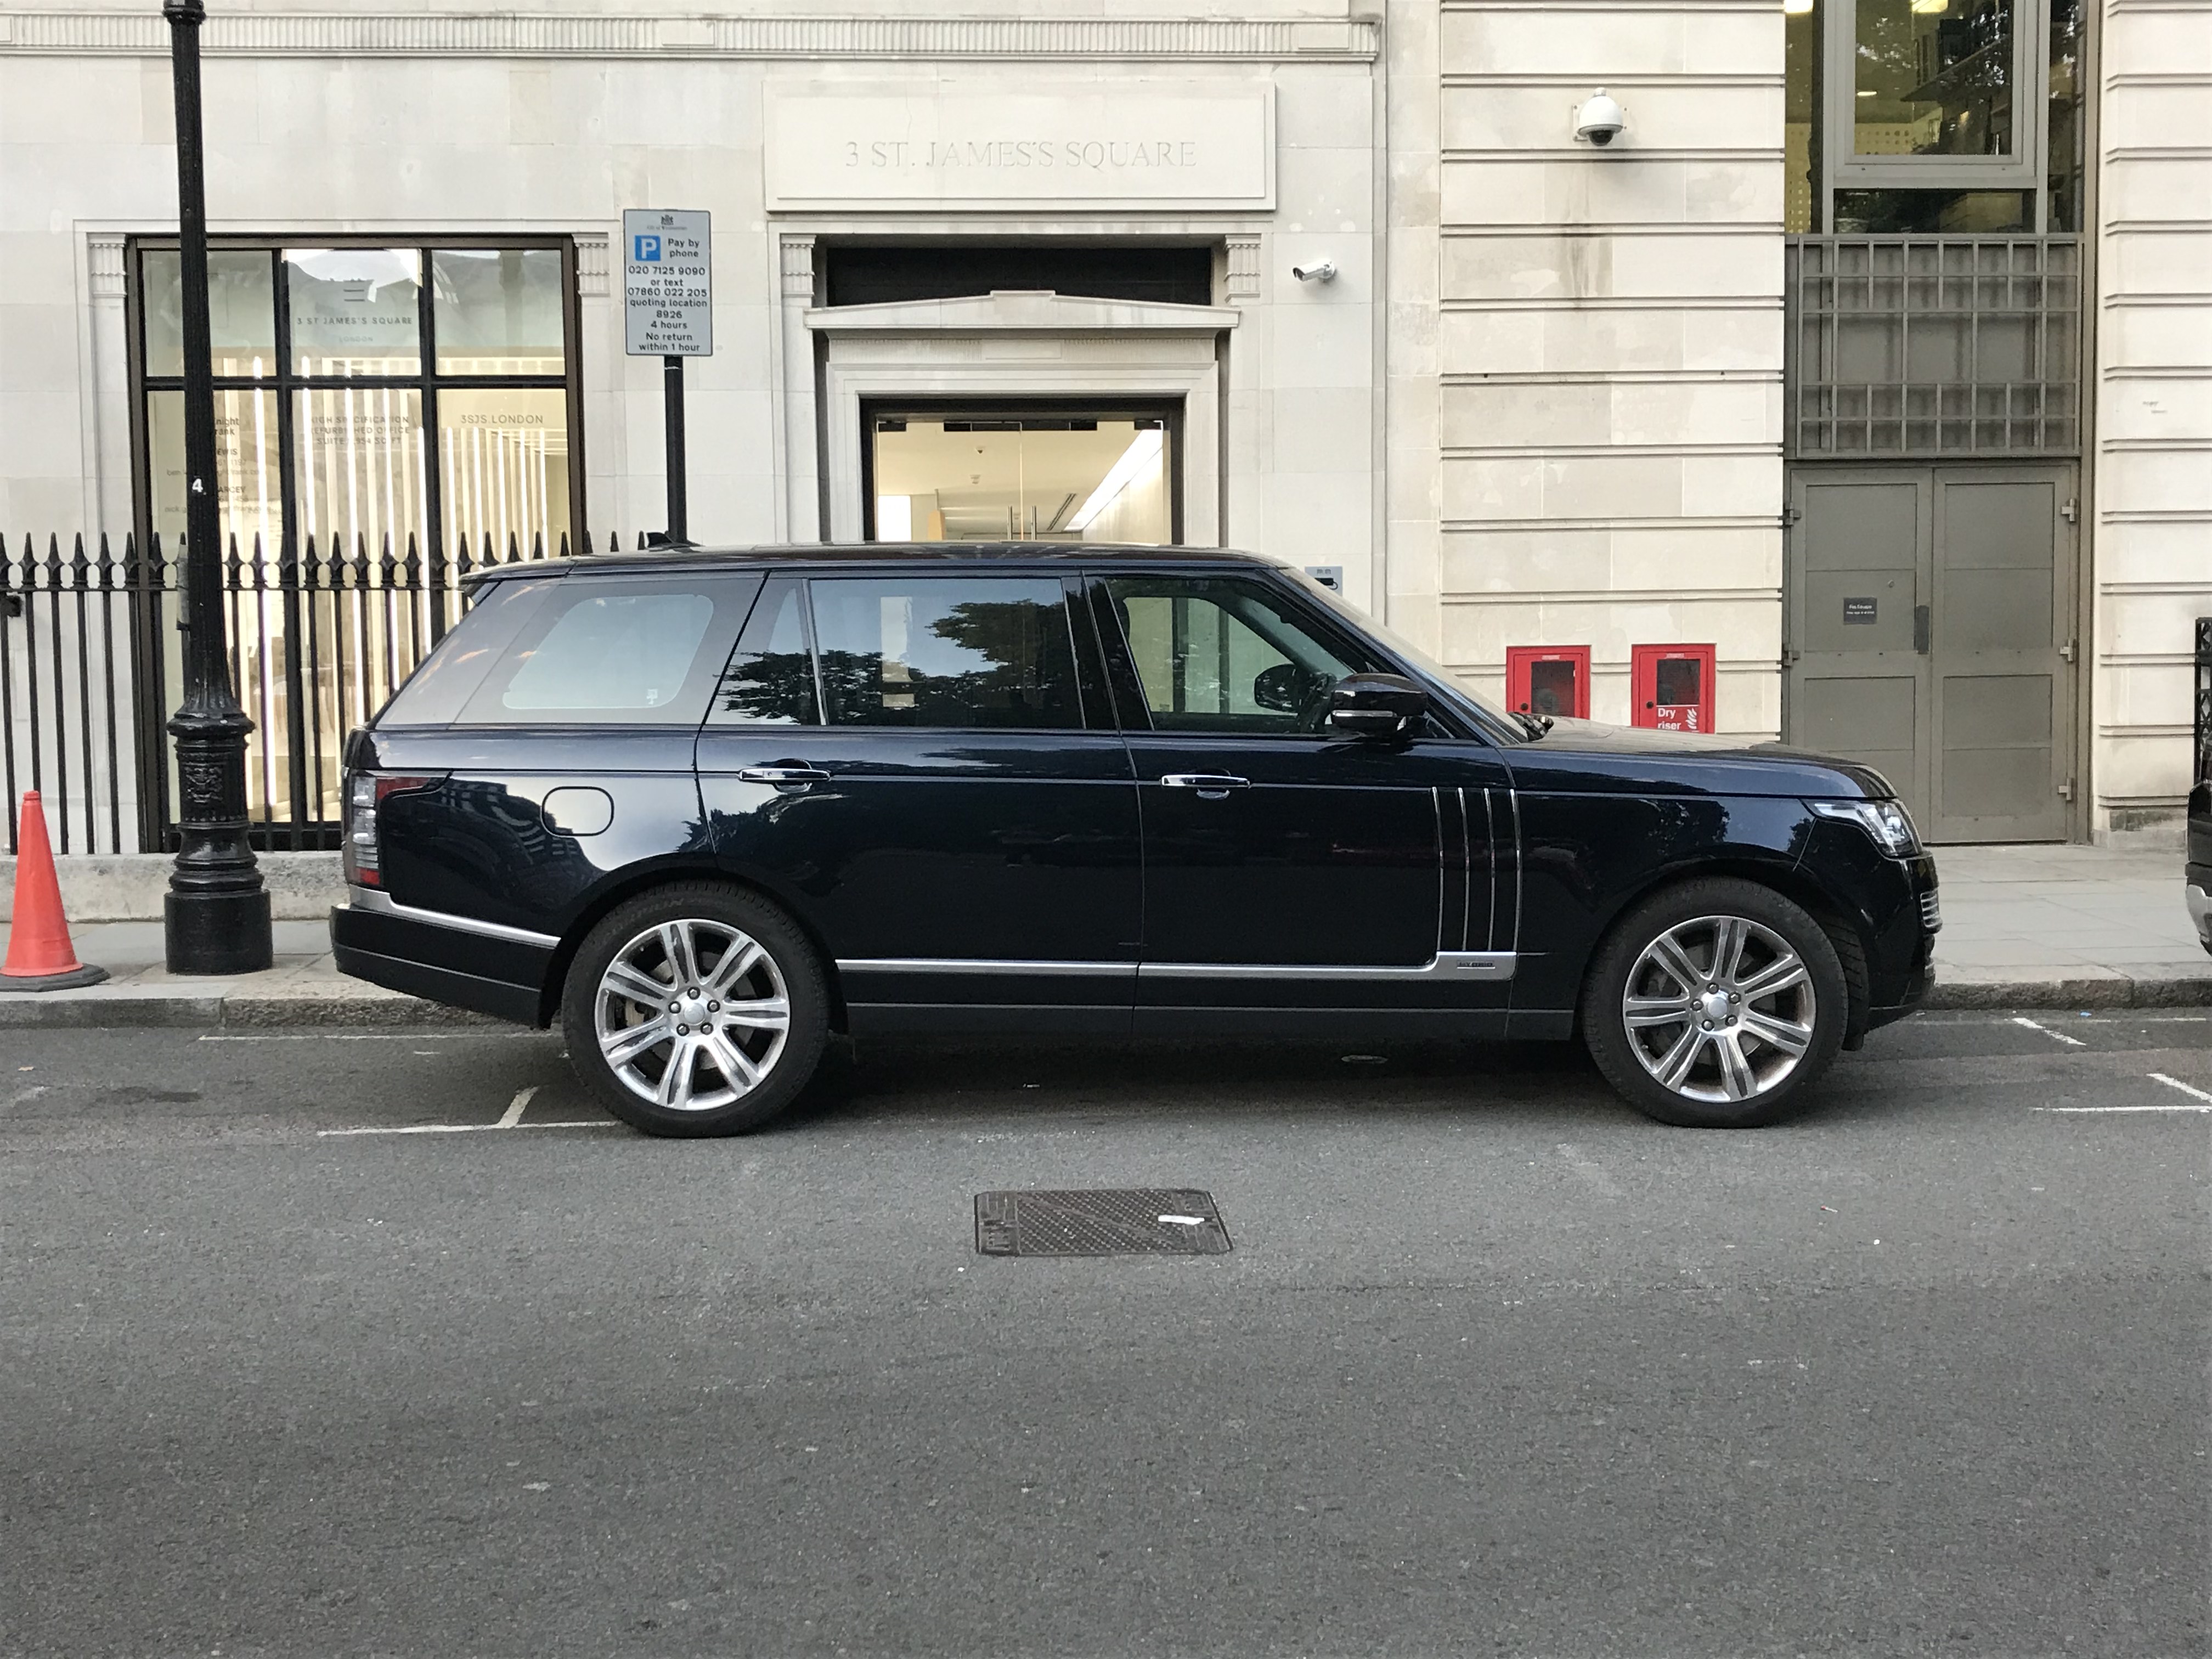 A Range Rover parked in London.